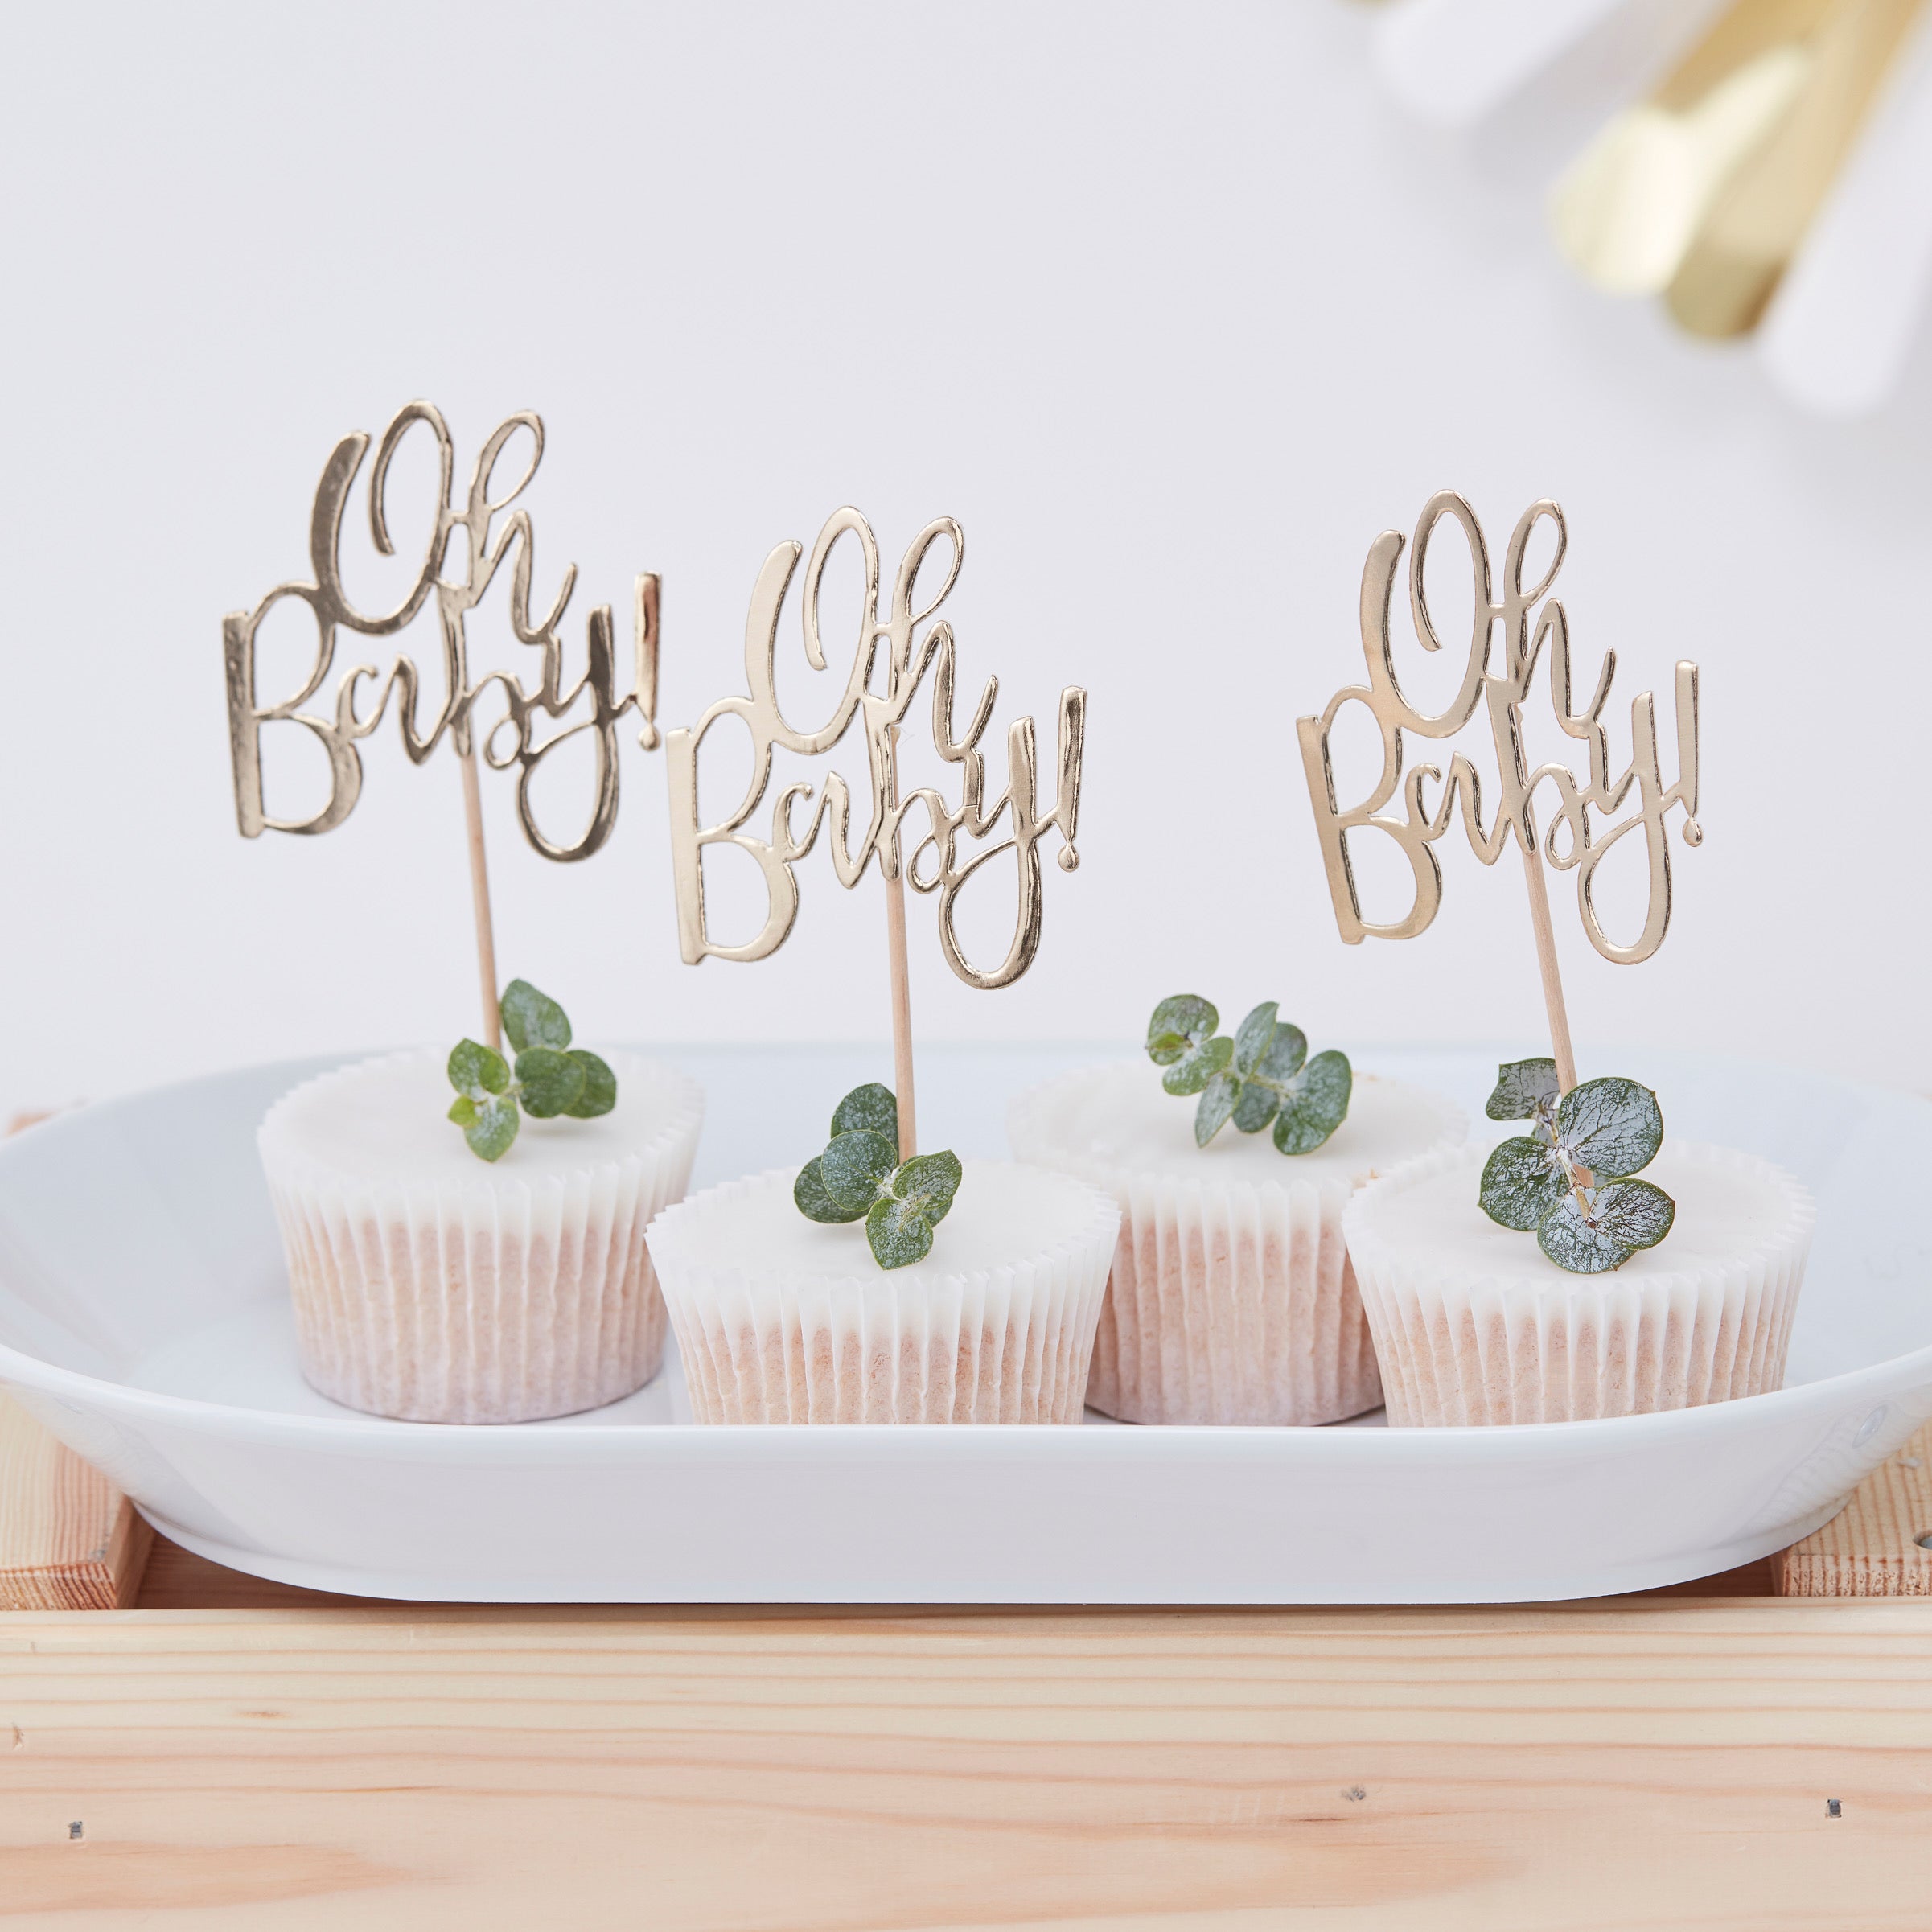 OH Baby, baby! We love this gender neutral baby shower theme and we know the mom-to-be will too. 